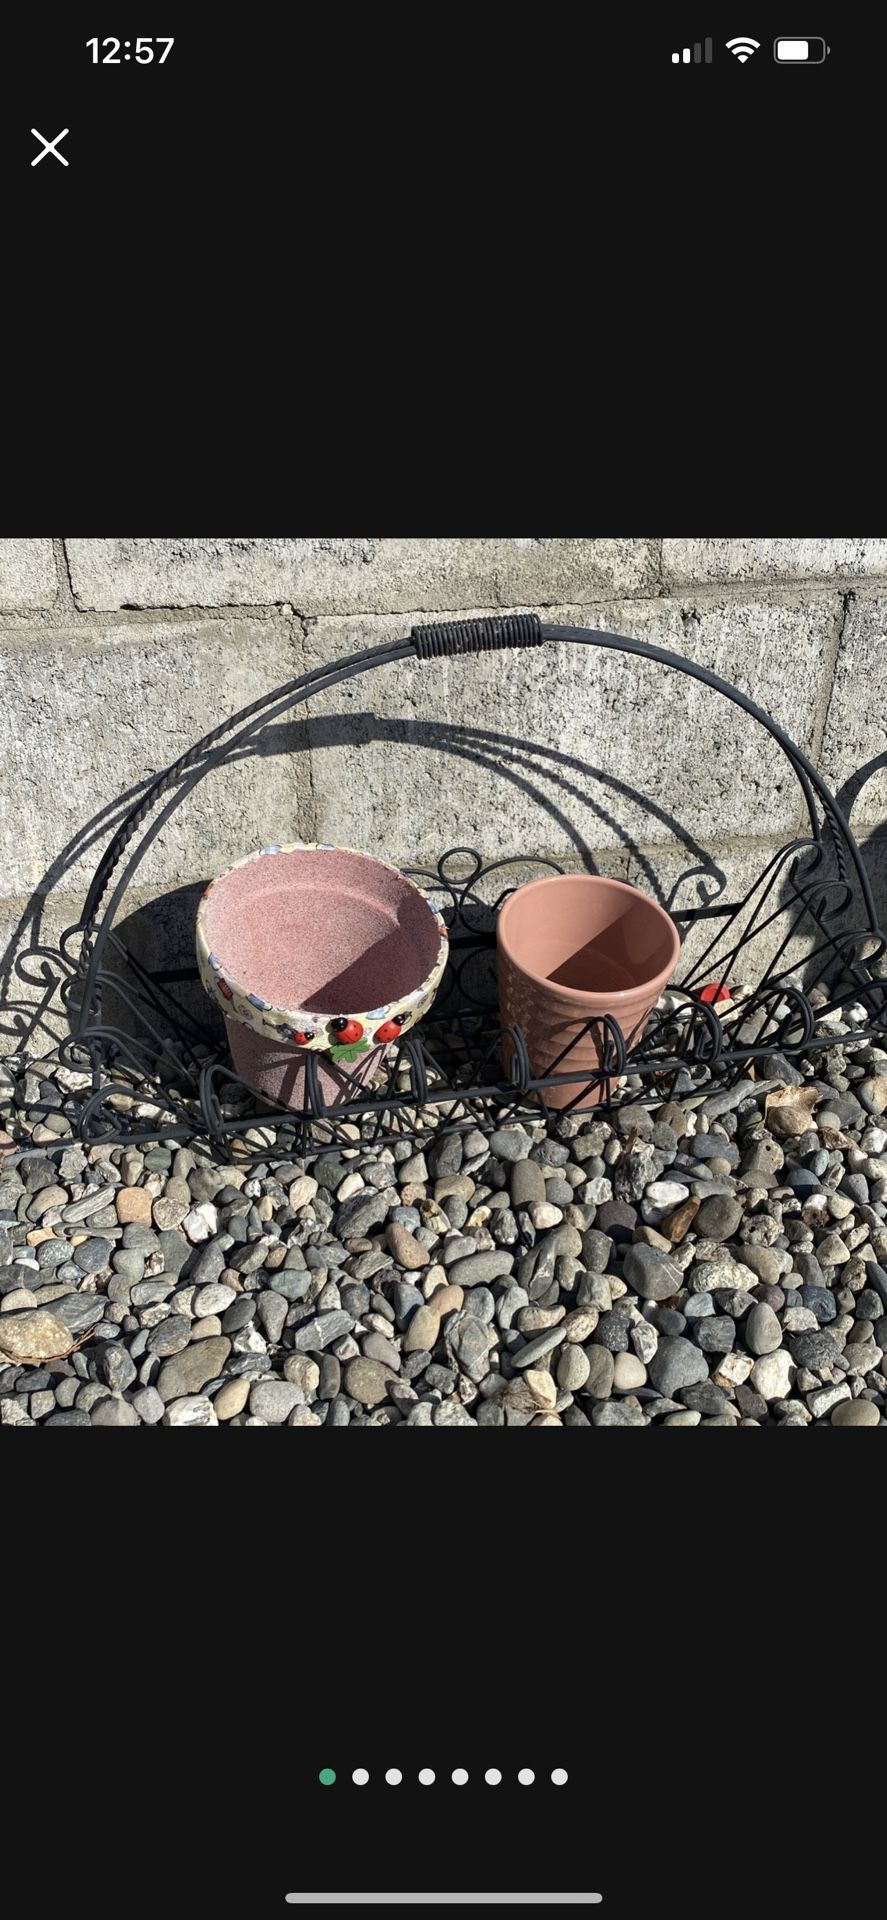 Window Wire Basket With Pots Included 22X9 Inches For 14.5 Tall